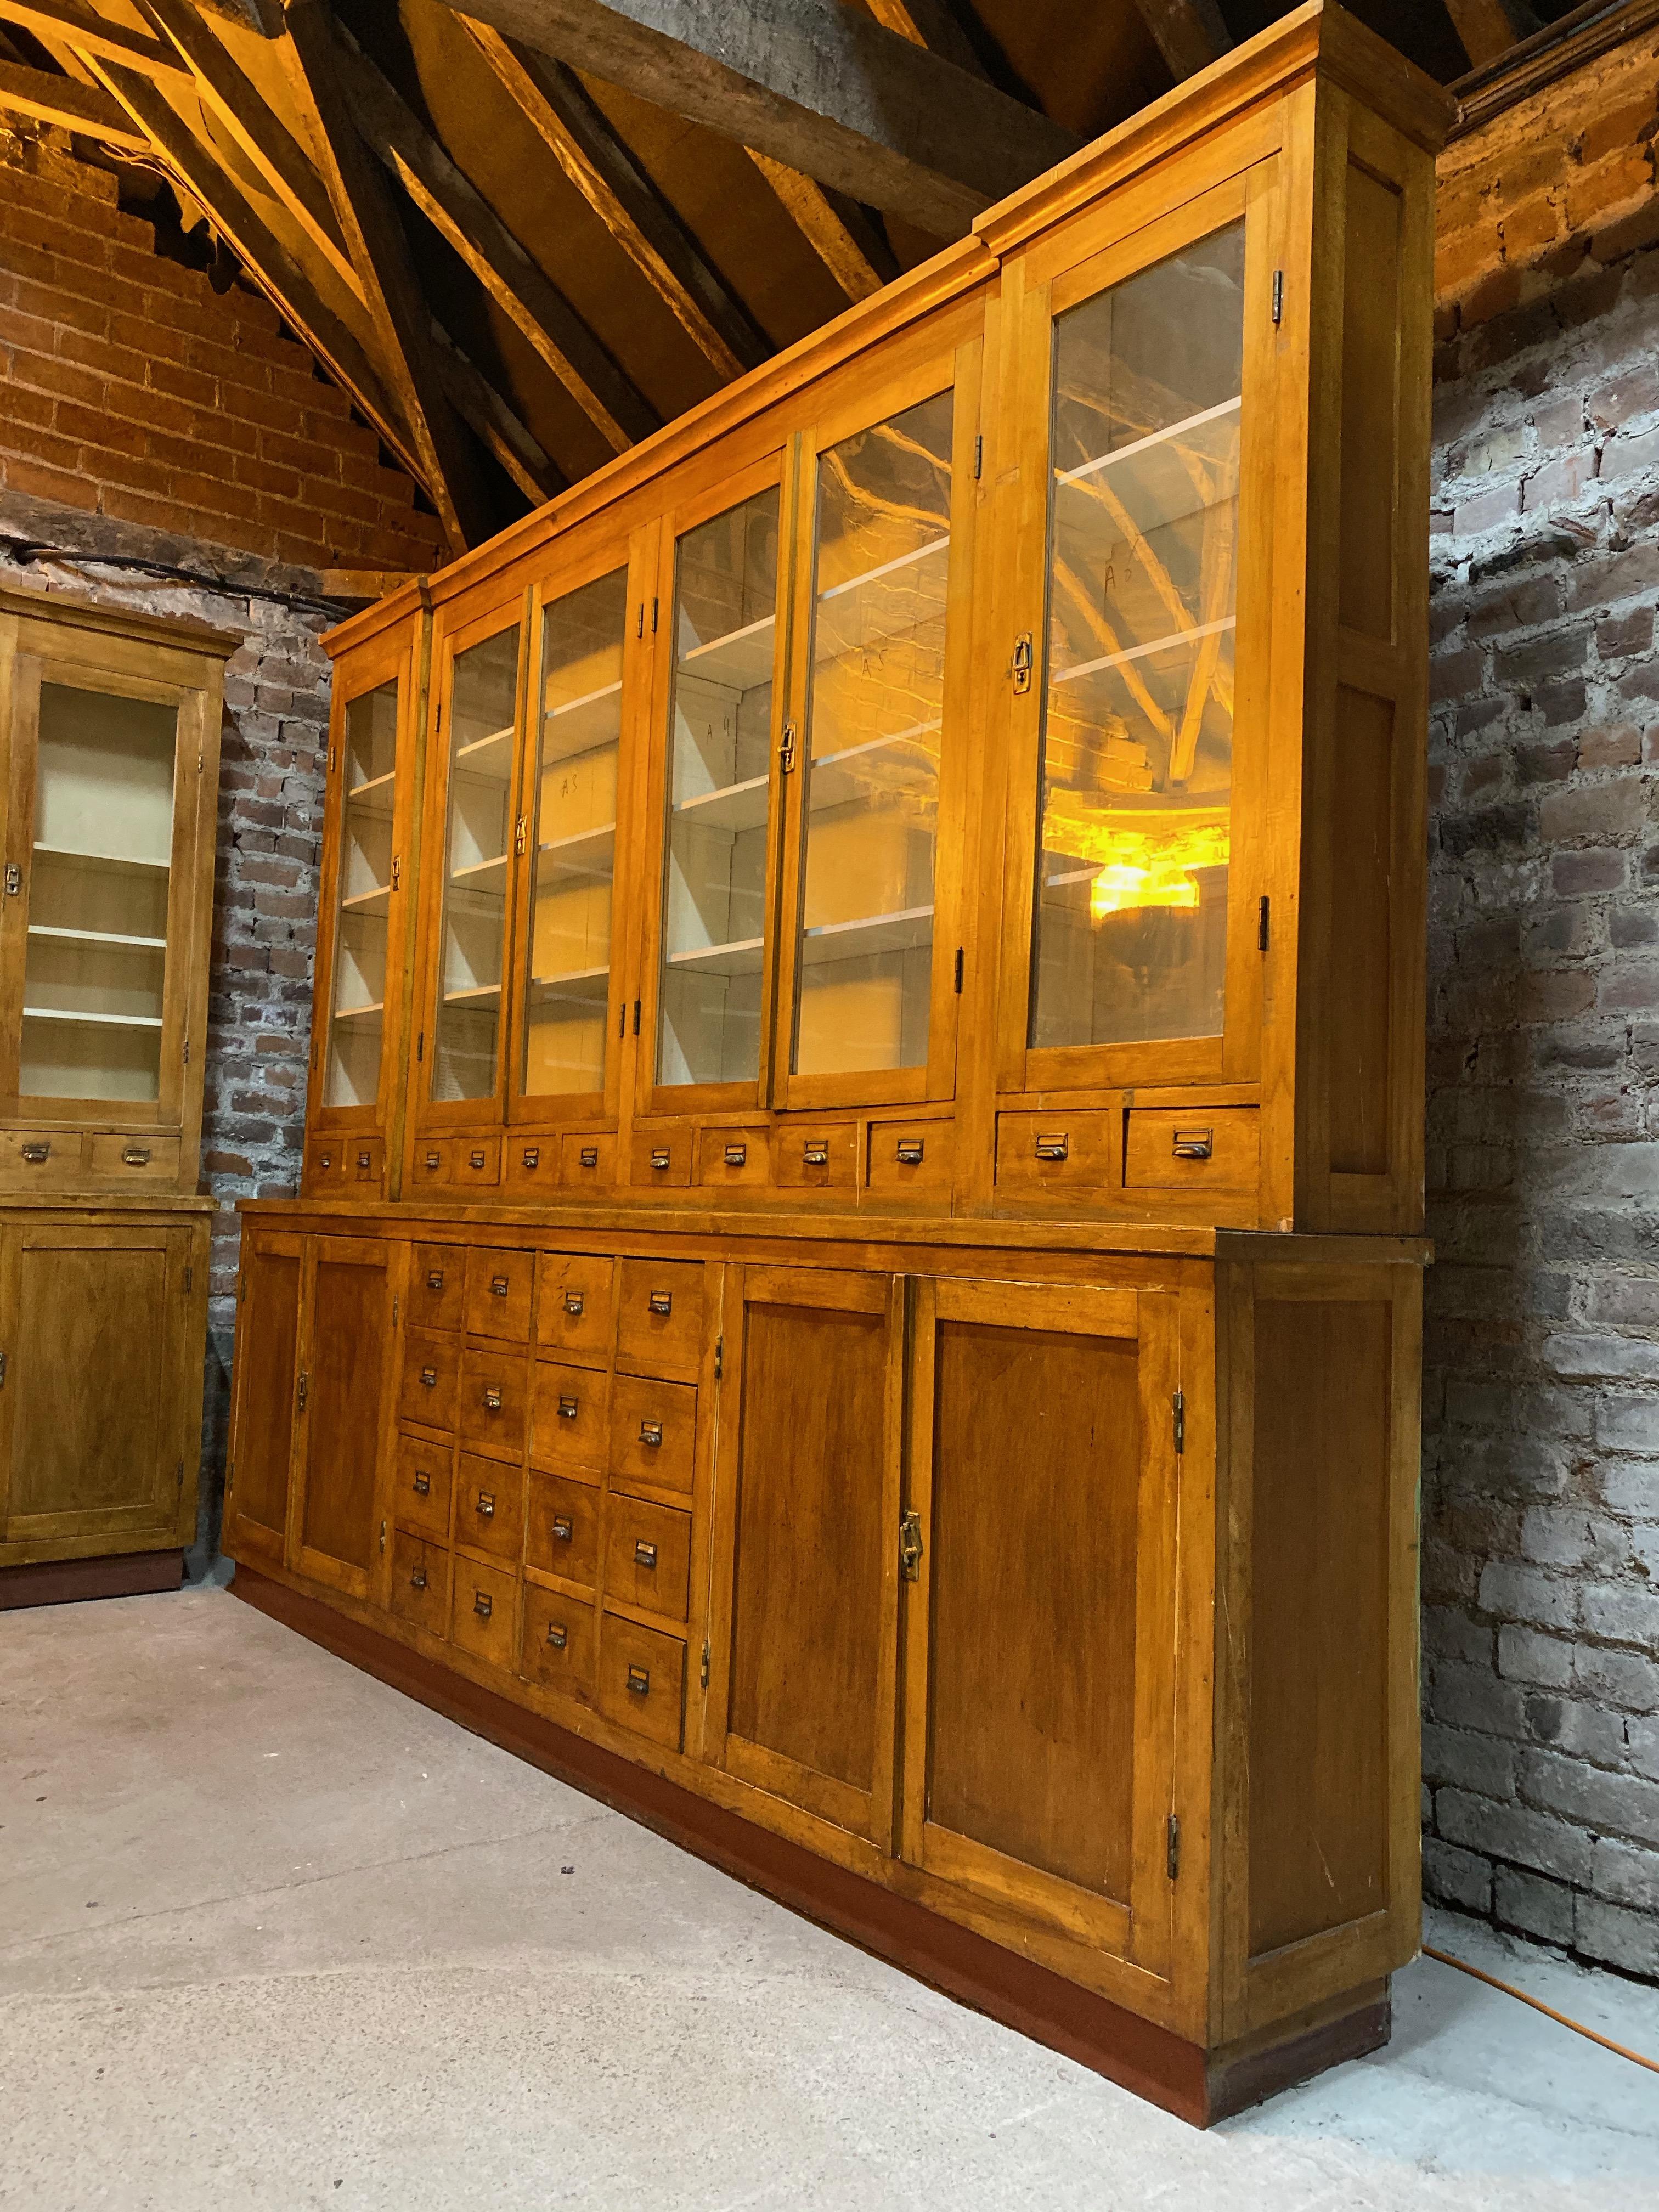 Large Apothecary Display Cabinet Pharmacy Chemist Shop, circa 1920s Number 1

Magnificent breakfront Apothecary Pharmacy beech display cabinet dating to circa 1920s, This piece is one of six similar pieces all from the same pharmacy, the upper